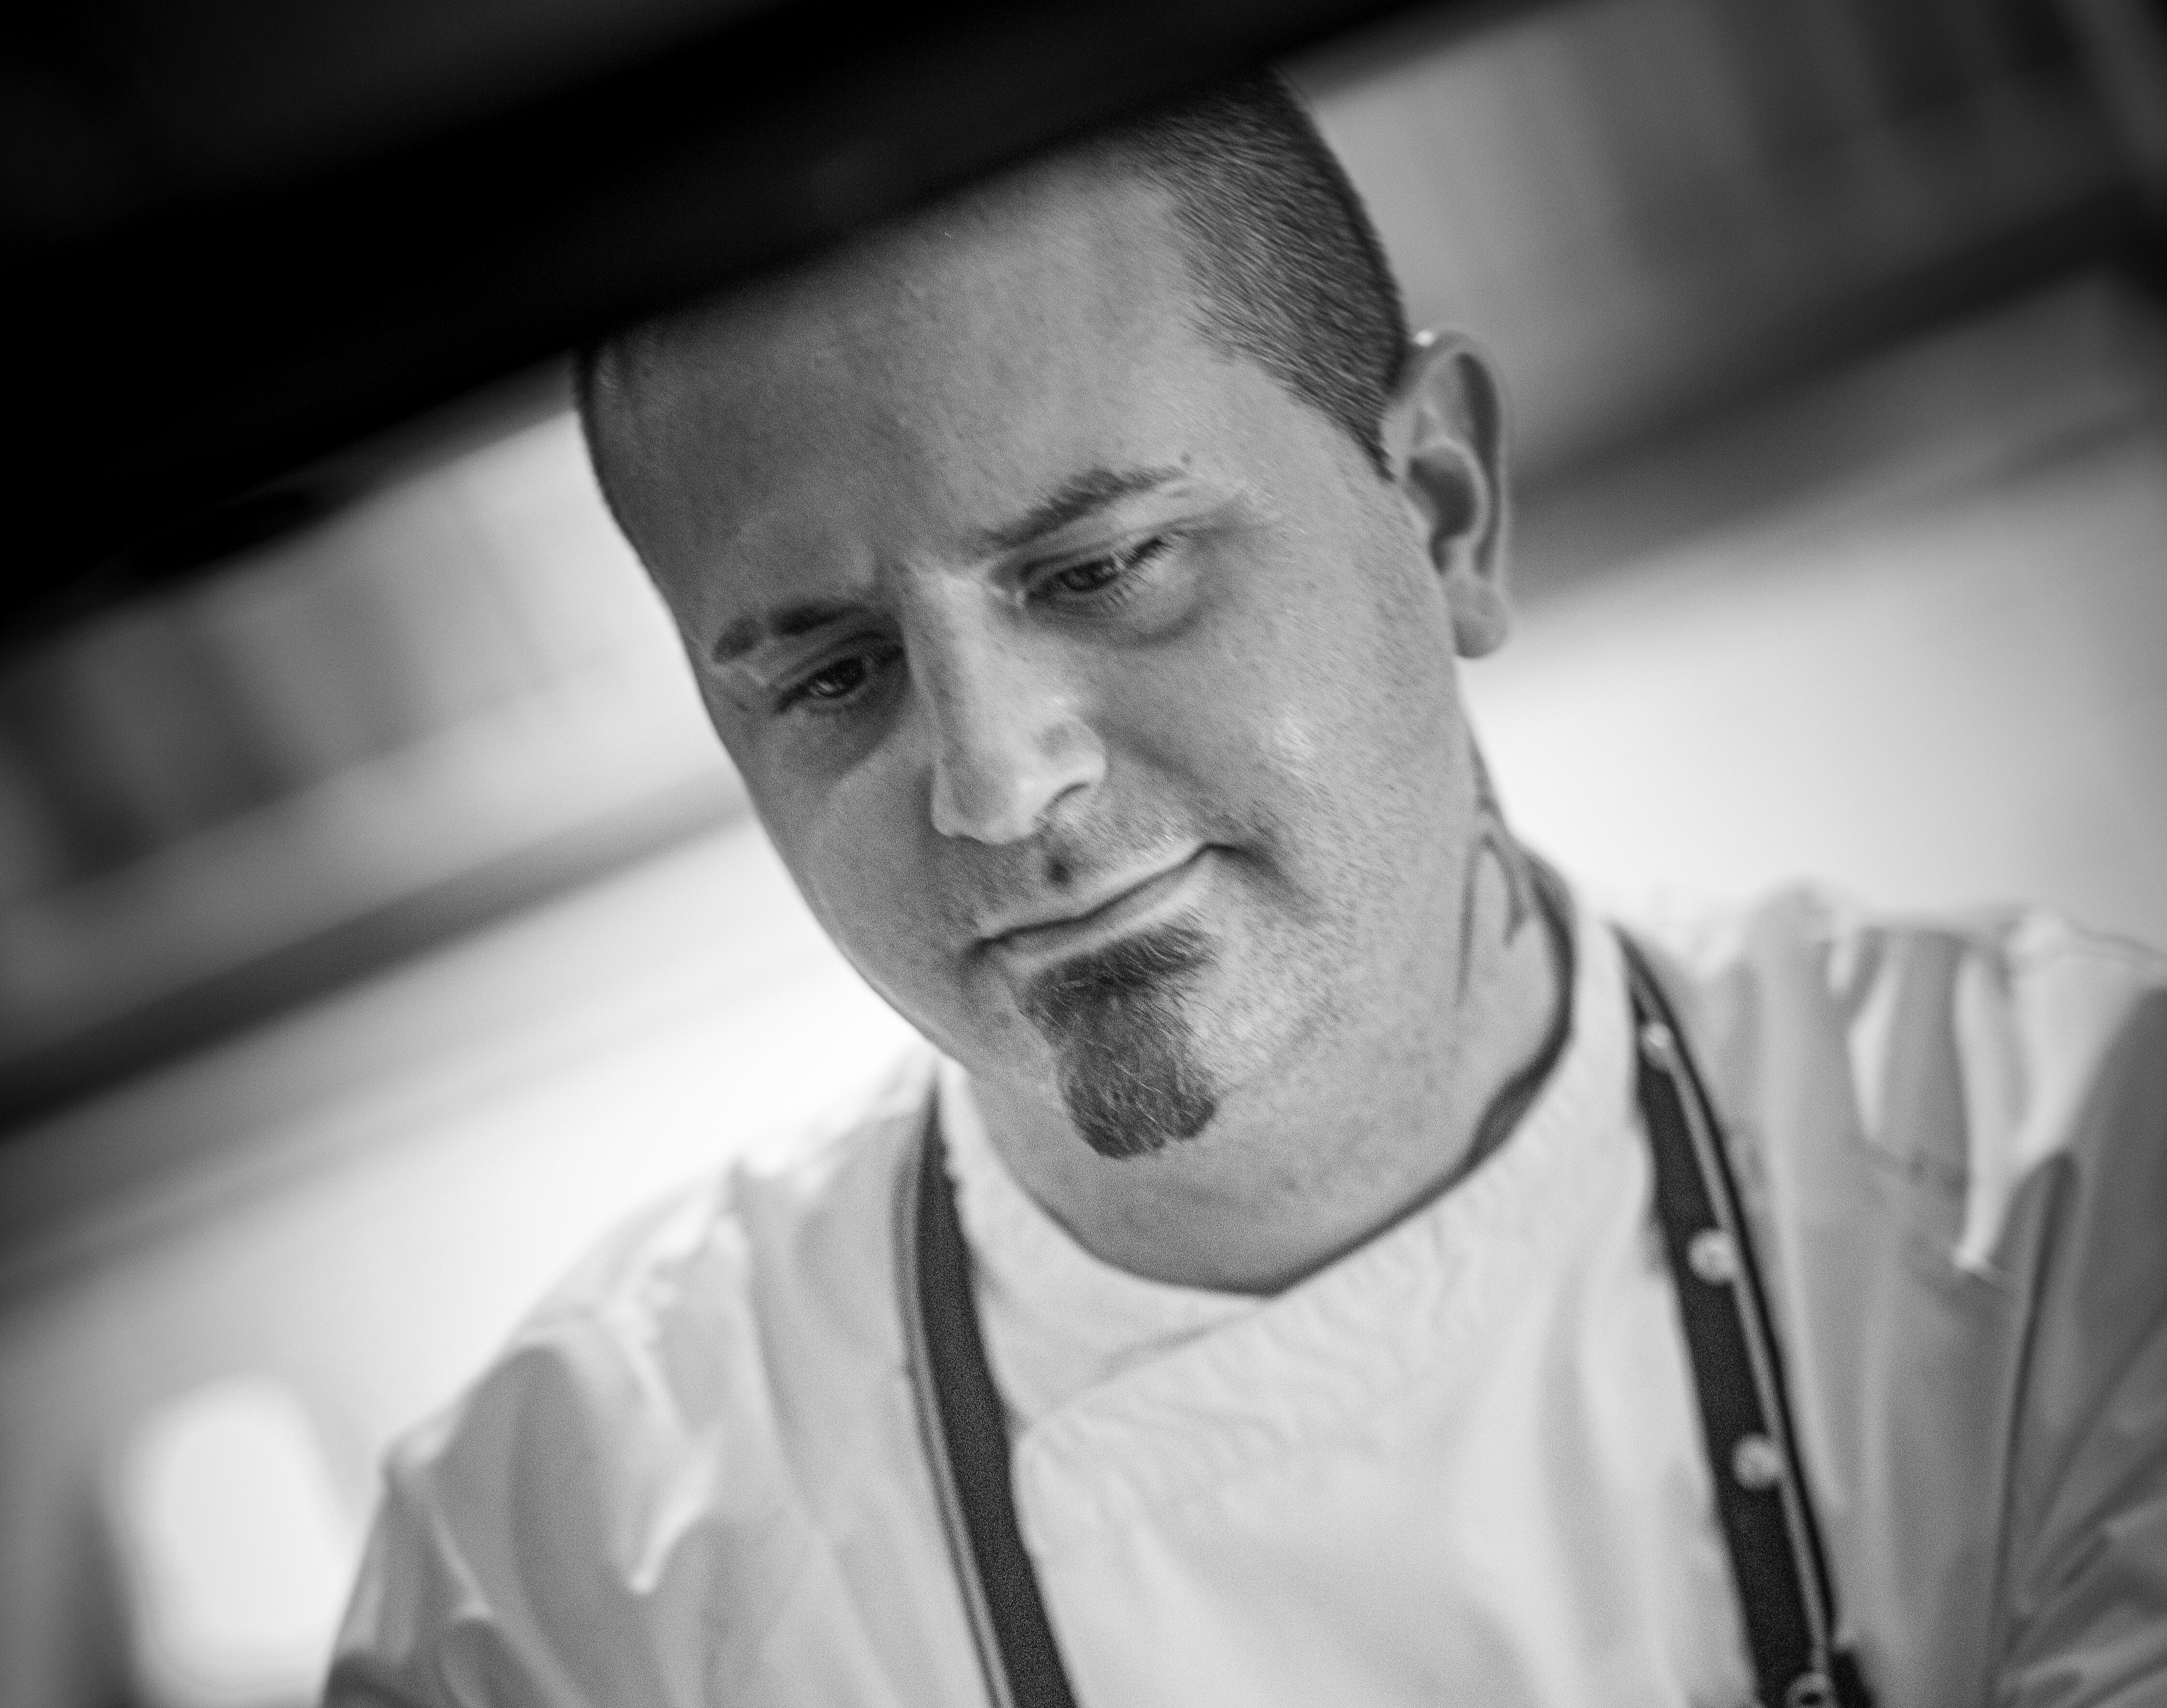 Jake O'Riley appointed head chef at London's South Place hotel